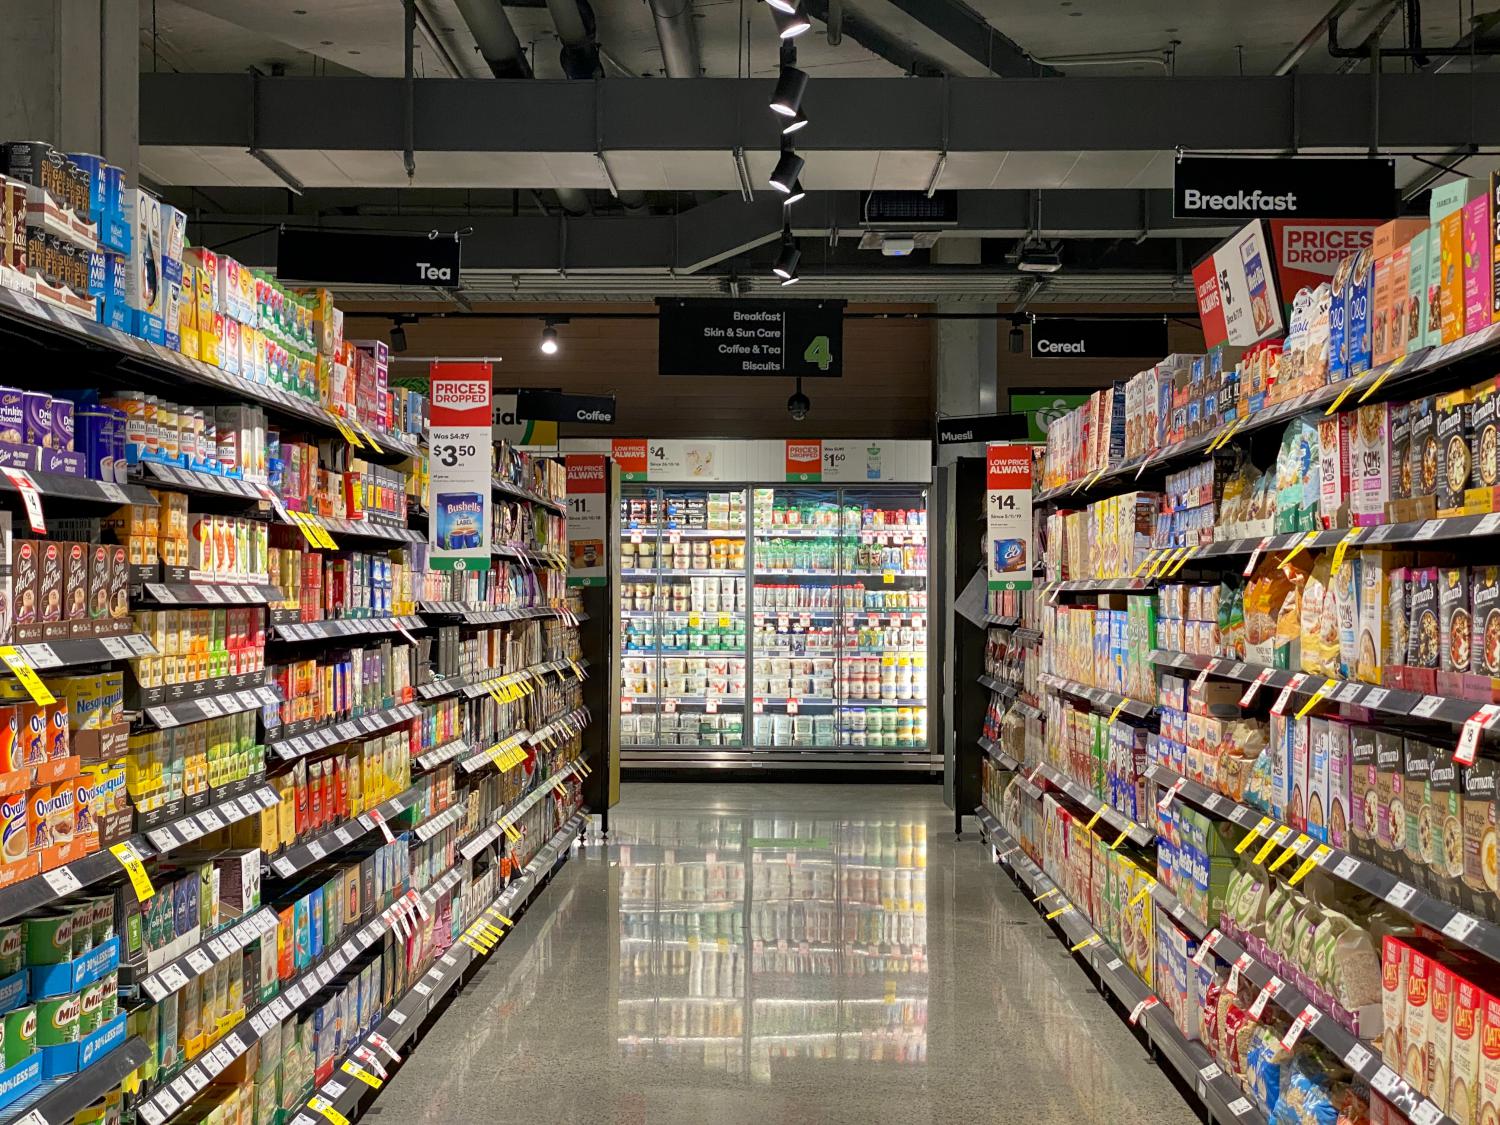 Will there soon only be fiber-based packaging in the supermarket?